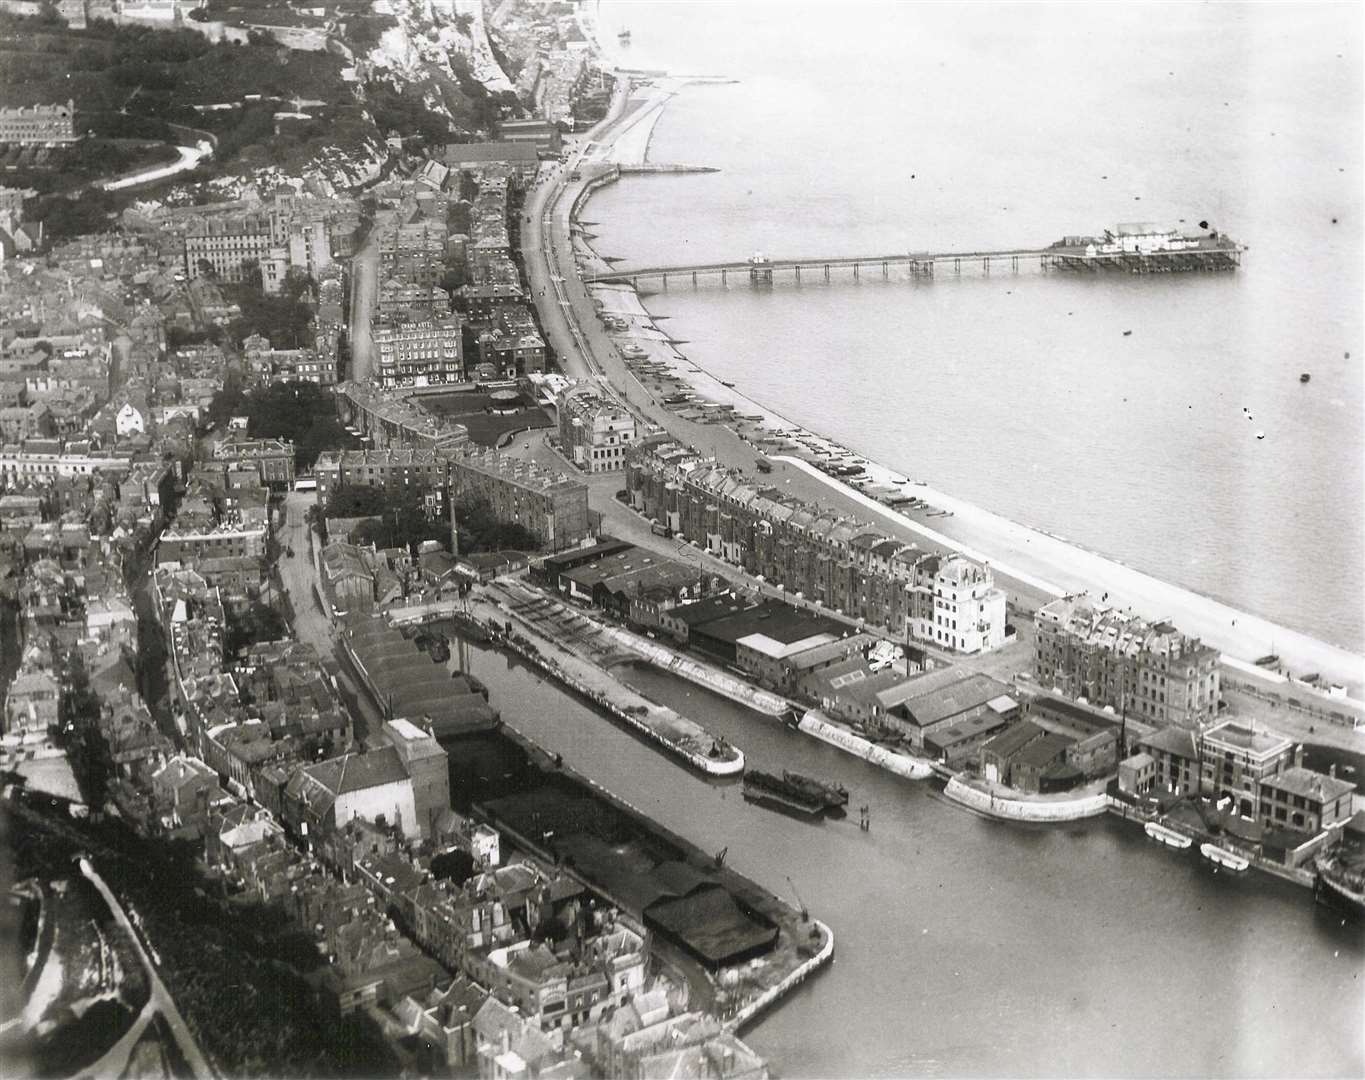 The Wellington Dock and Promenade Pier viewed from above in the 1920s. Picture: Aerofilms